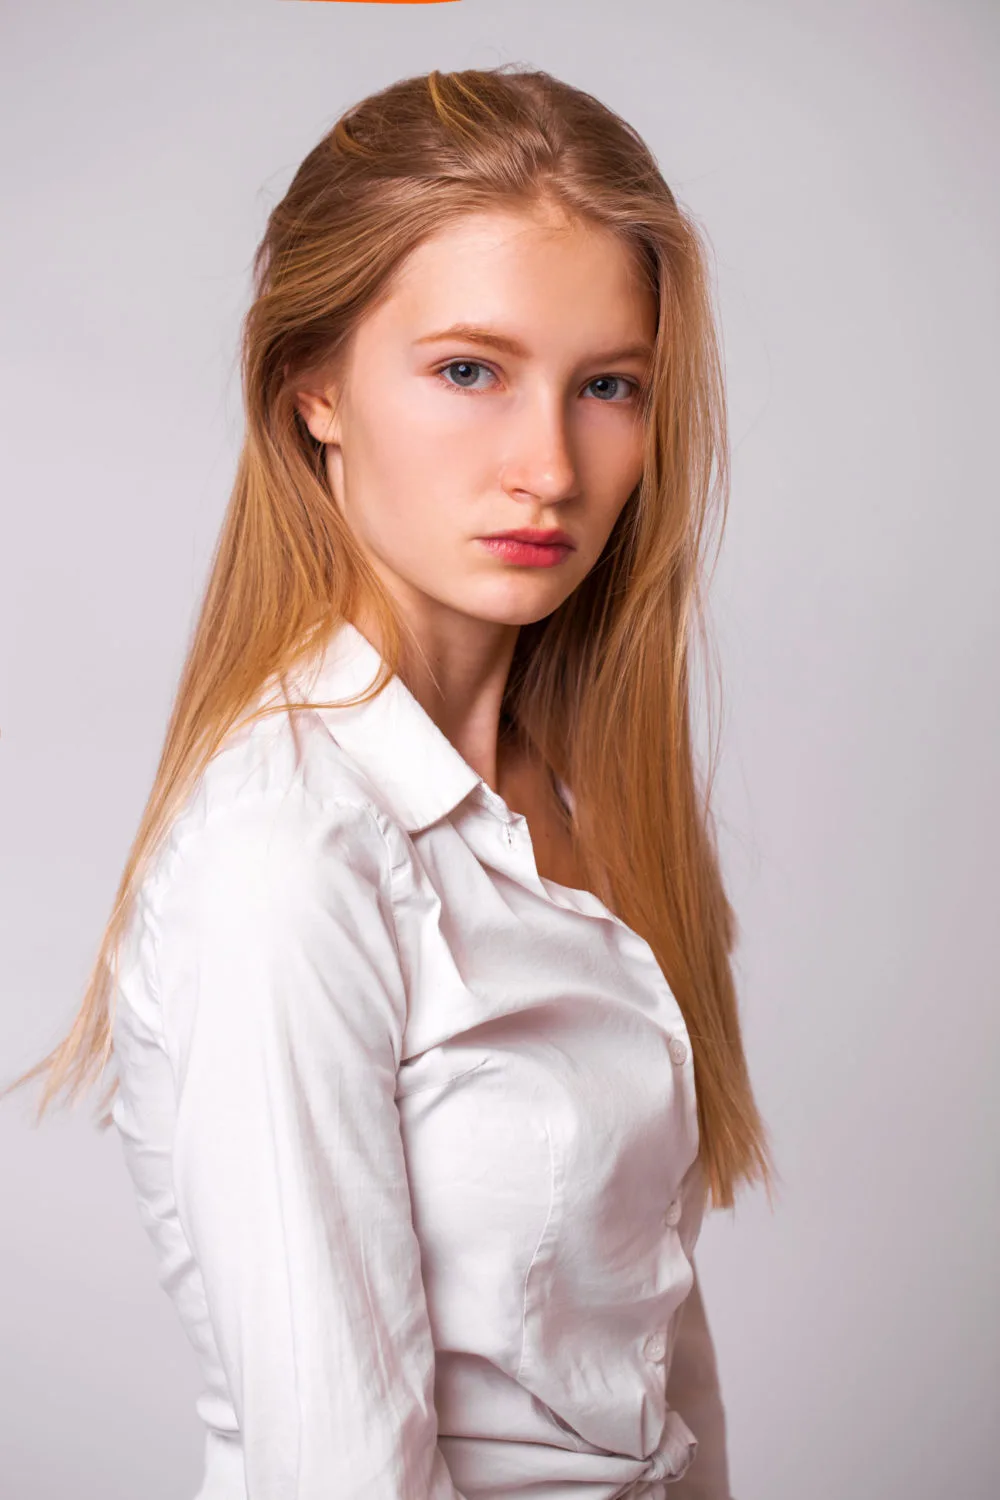 Dark Copper Blonde hair on a woman in a white button-up shirt